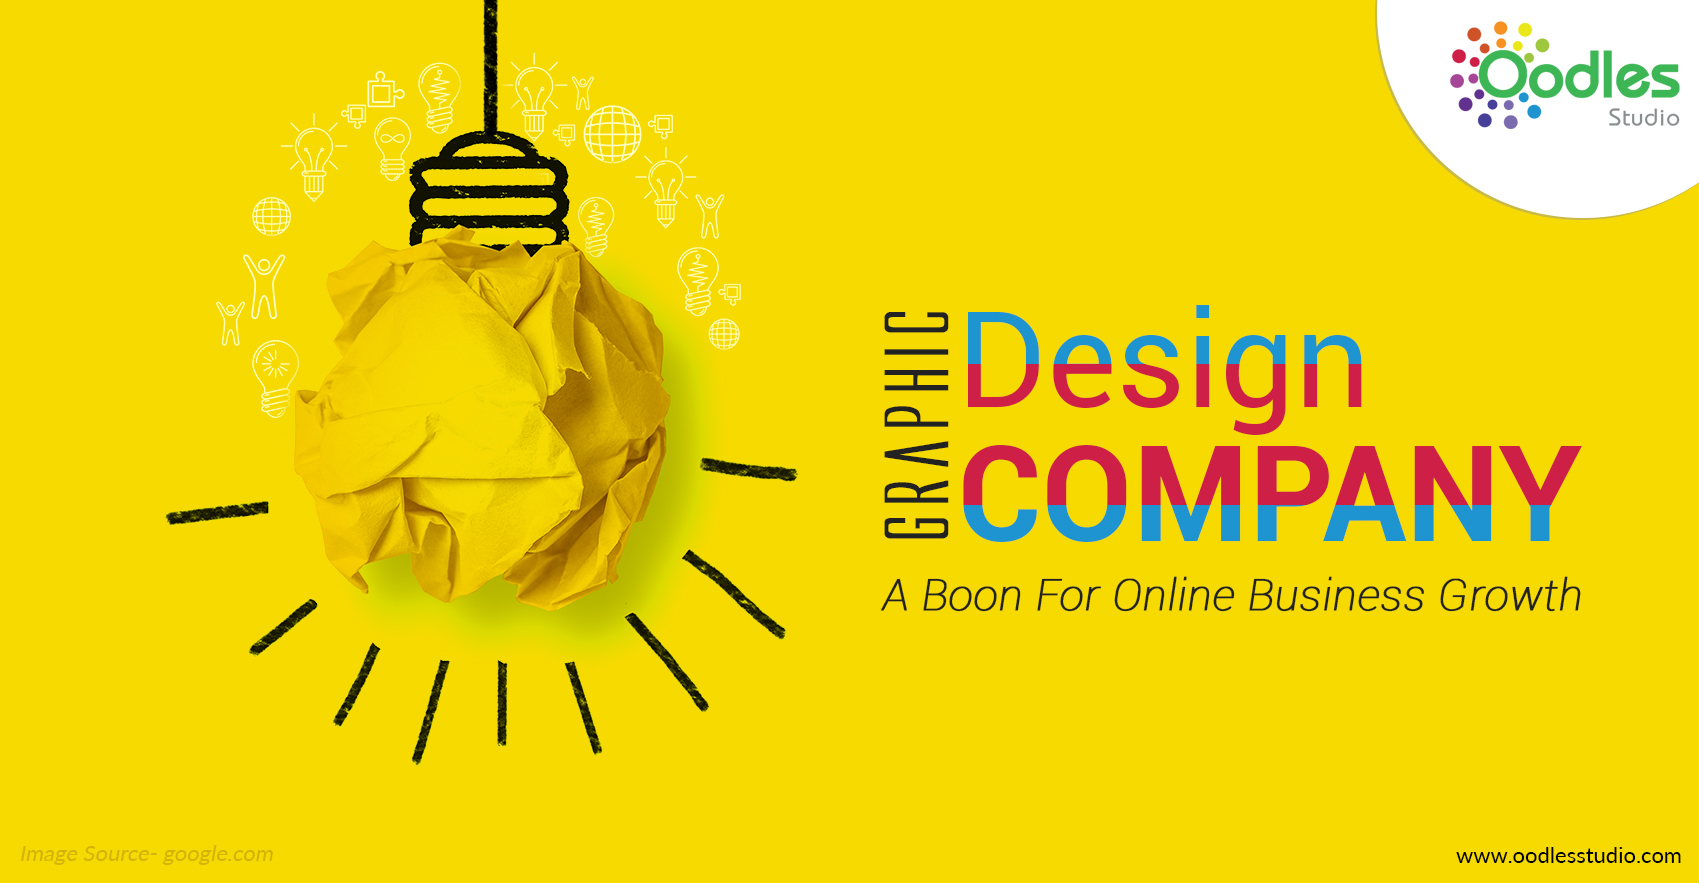 Graphic Design Company: A Boon For Online Business Growth